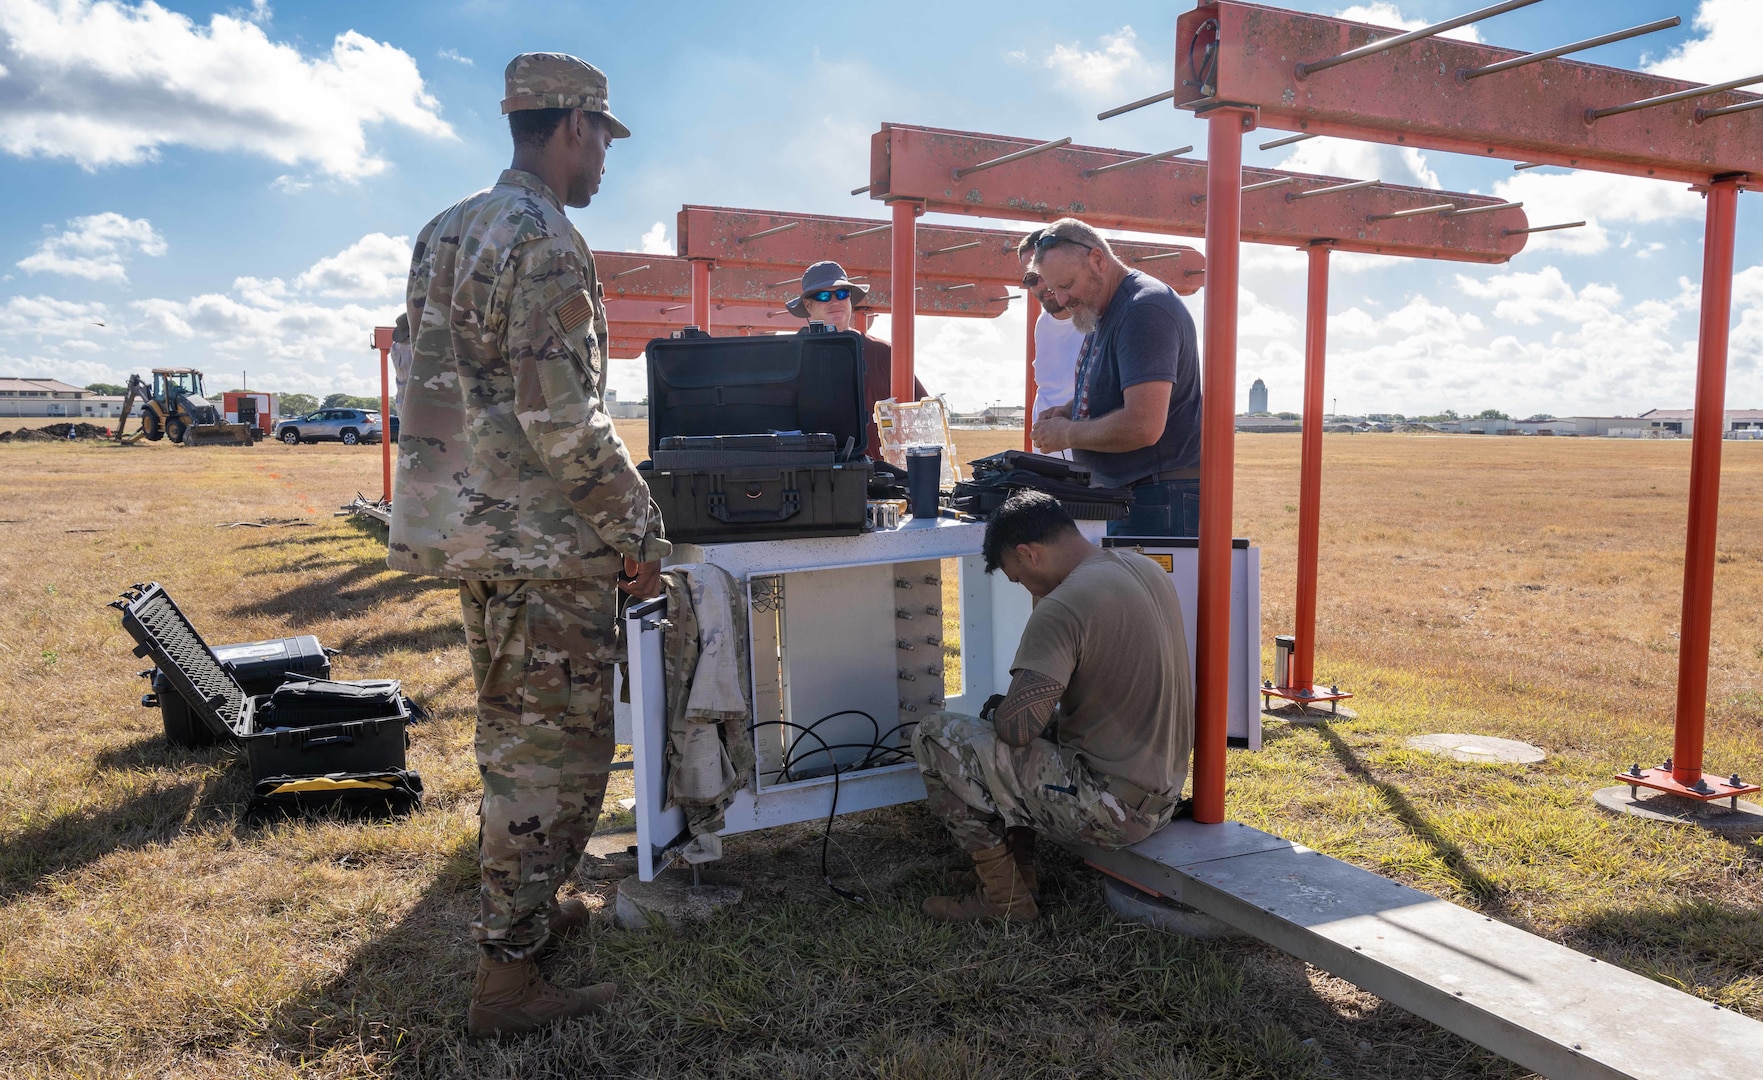 Members from the RAWS and 502nd Civil Engineering team worked tirelessly to fix the damaged localizer shelter in record time resulting in zero missed training sorties.